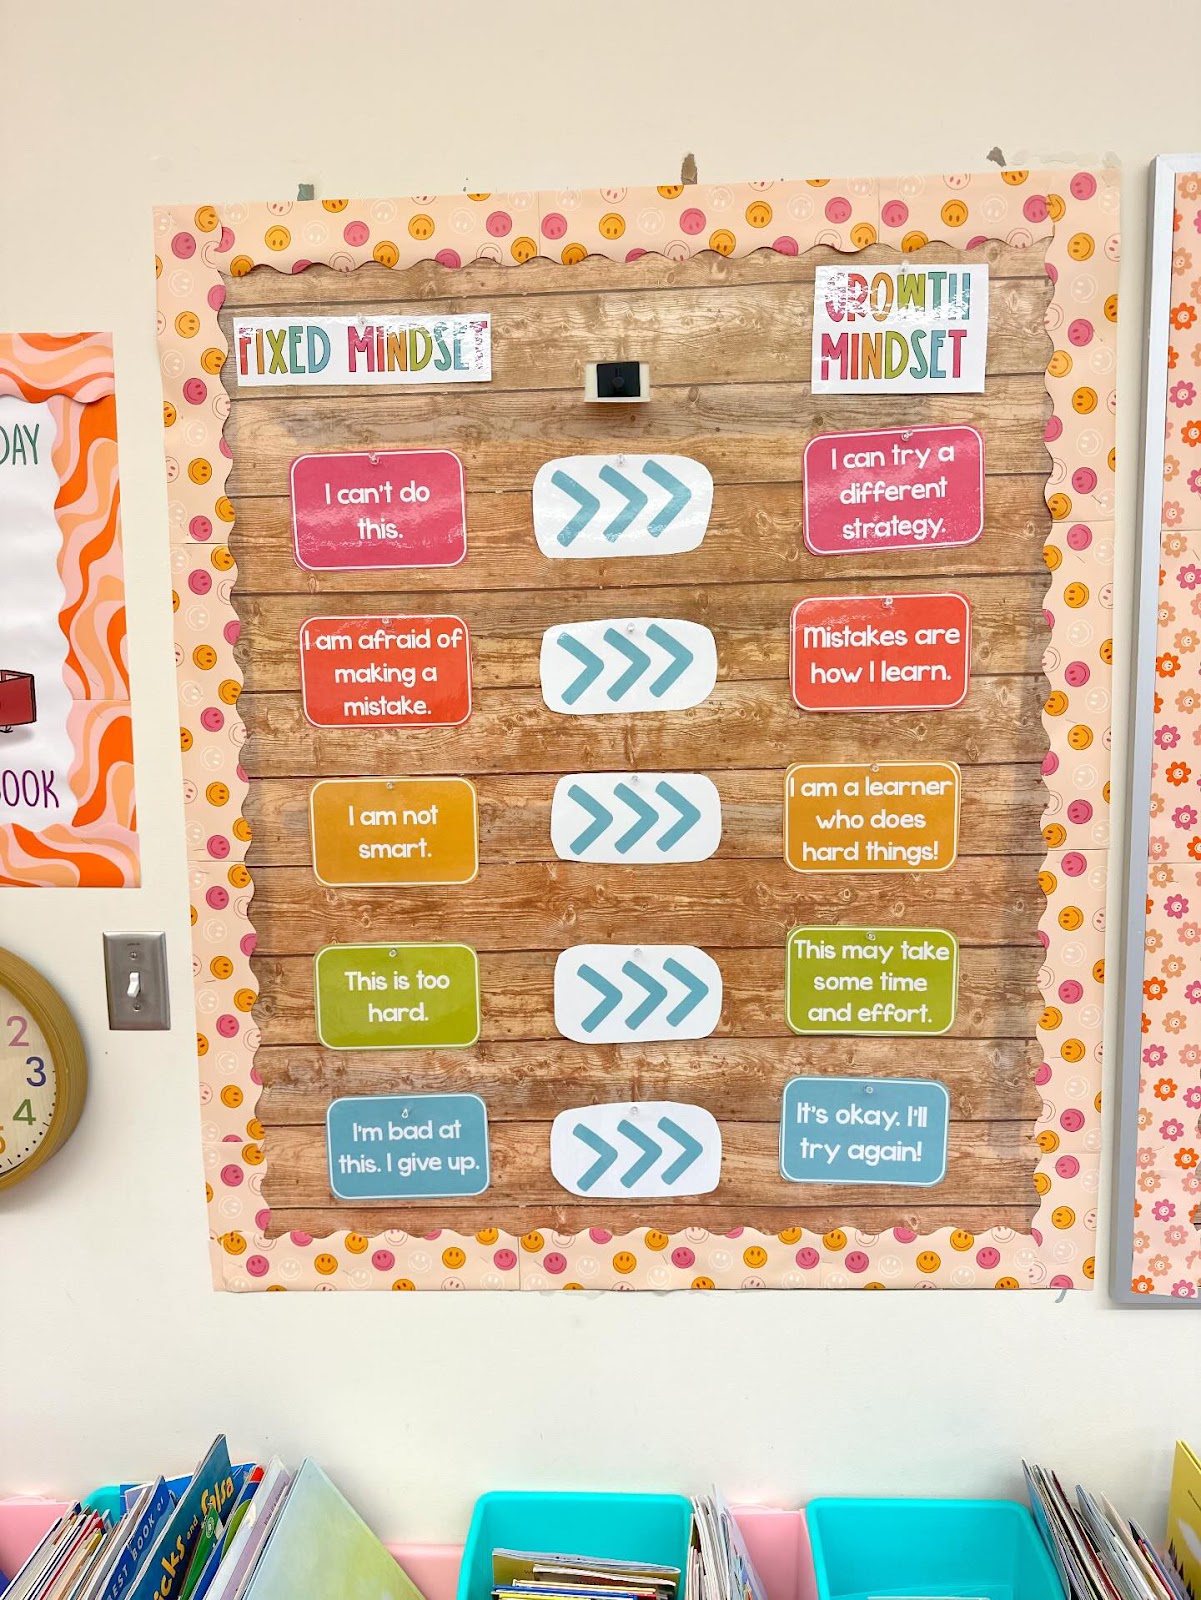 This image shows a growth mindset bulletin board display. There are twelve different sayings on the board. Six are under the "Fixed Mindset" heading & are examples of ways of thinking that fall under that category. The other six are directly opposite the fixed mindset and offer a swap students can make to start thinking with growth mindset instead. 